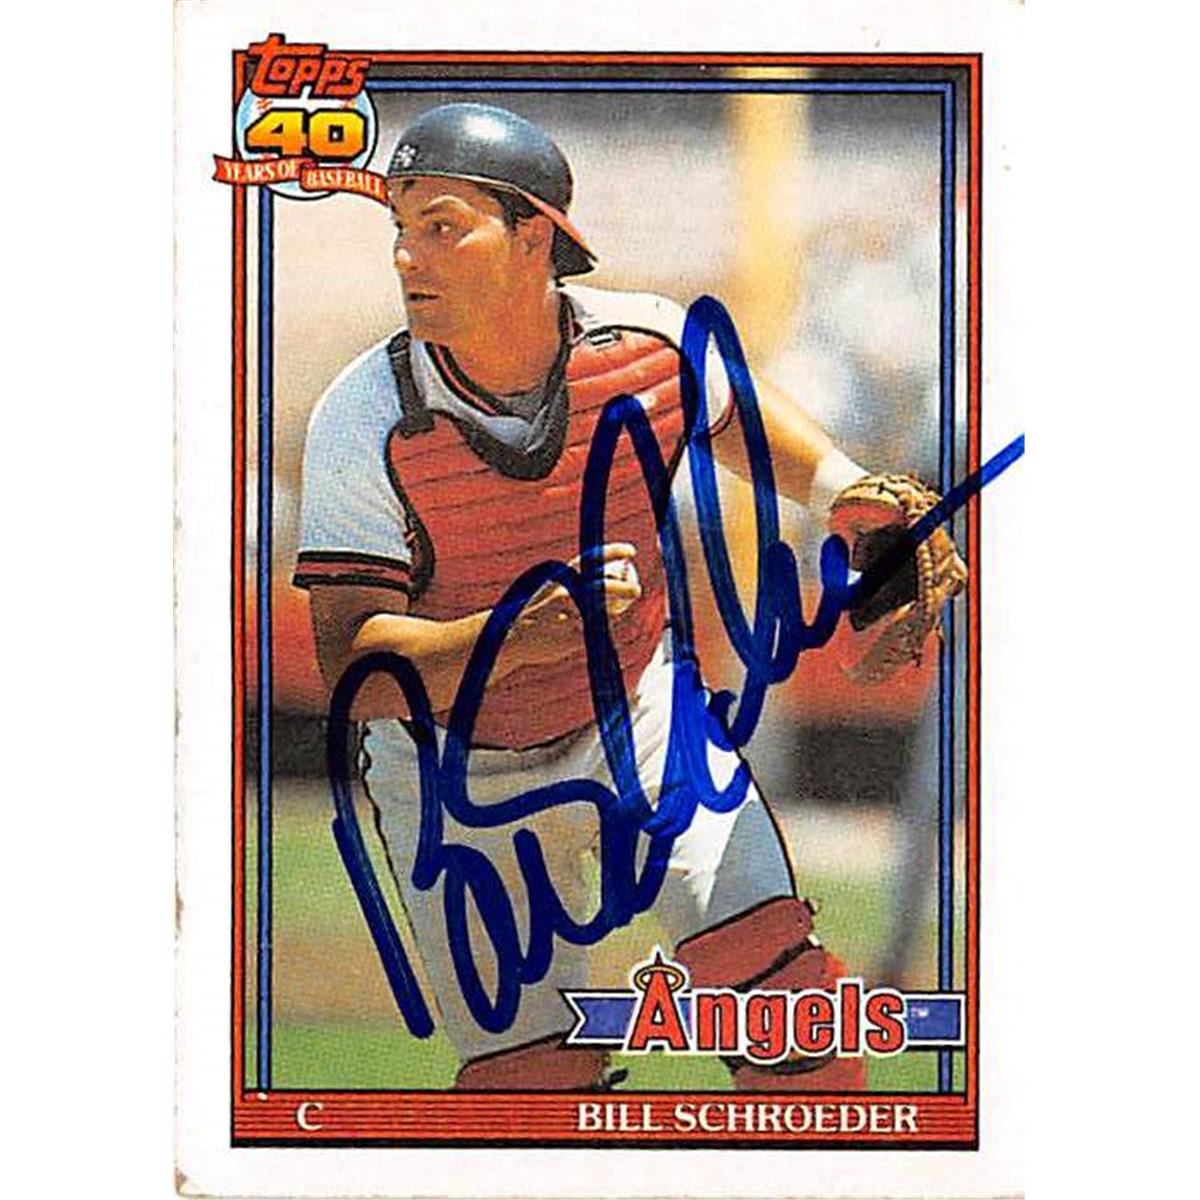 Picture of Autograph Warehouse 366283 Bill Schroeder Autographed Baseball Card - California Angels 1991 Topps No.452